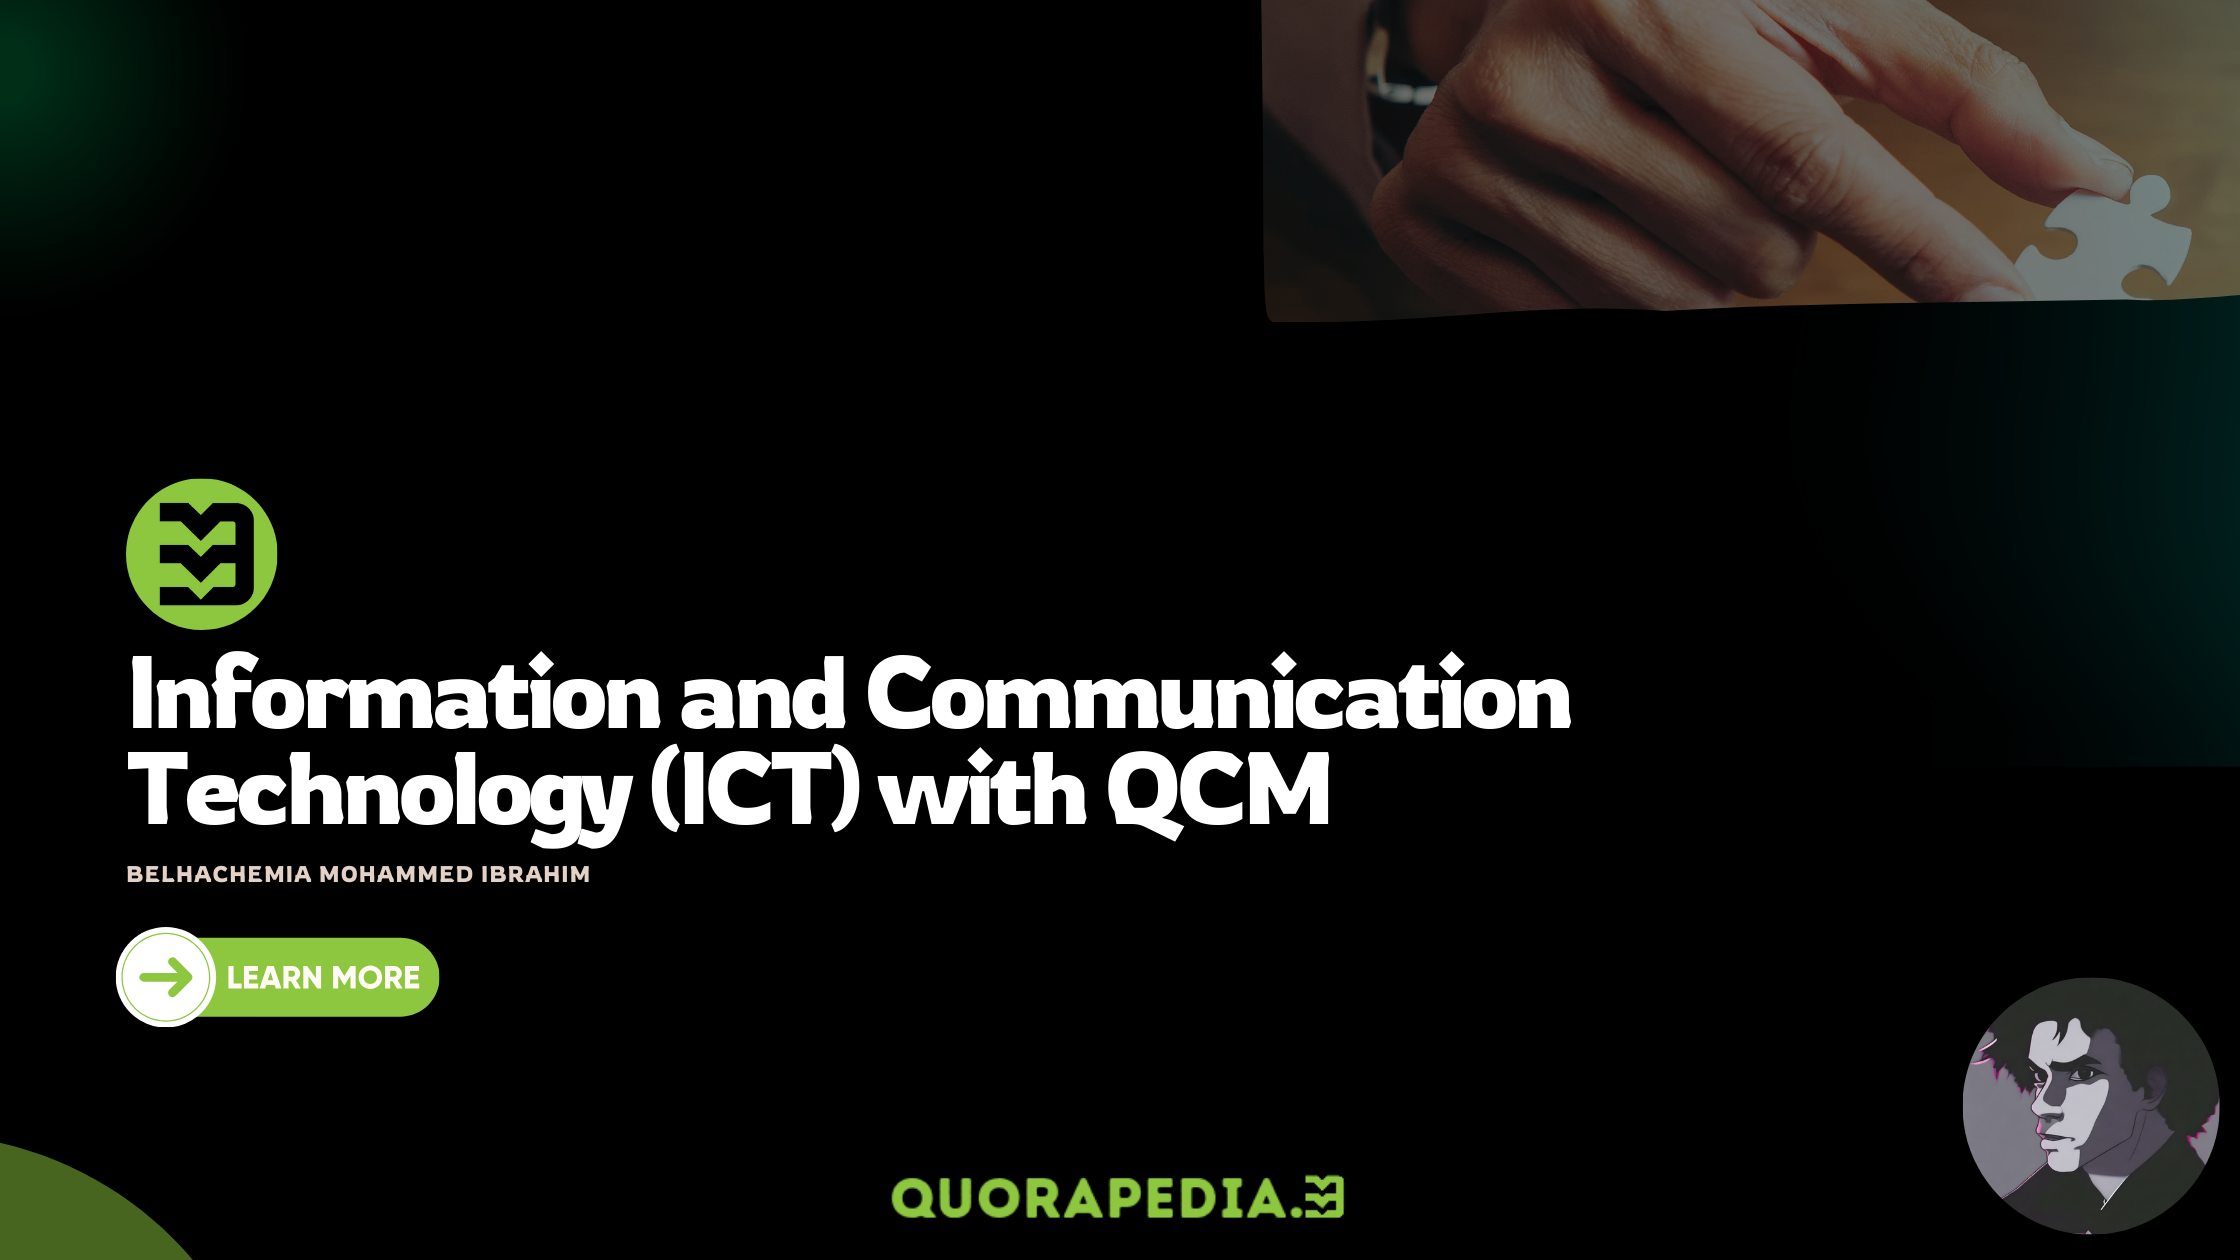 Information and Communication Technology (ICT) with QCM